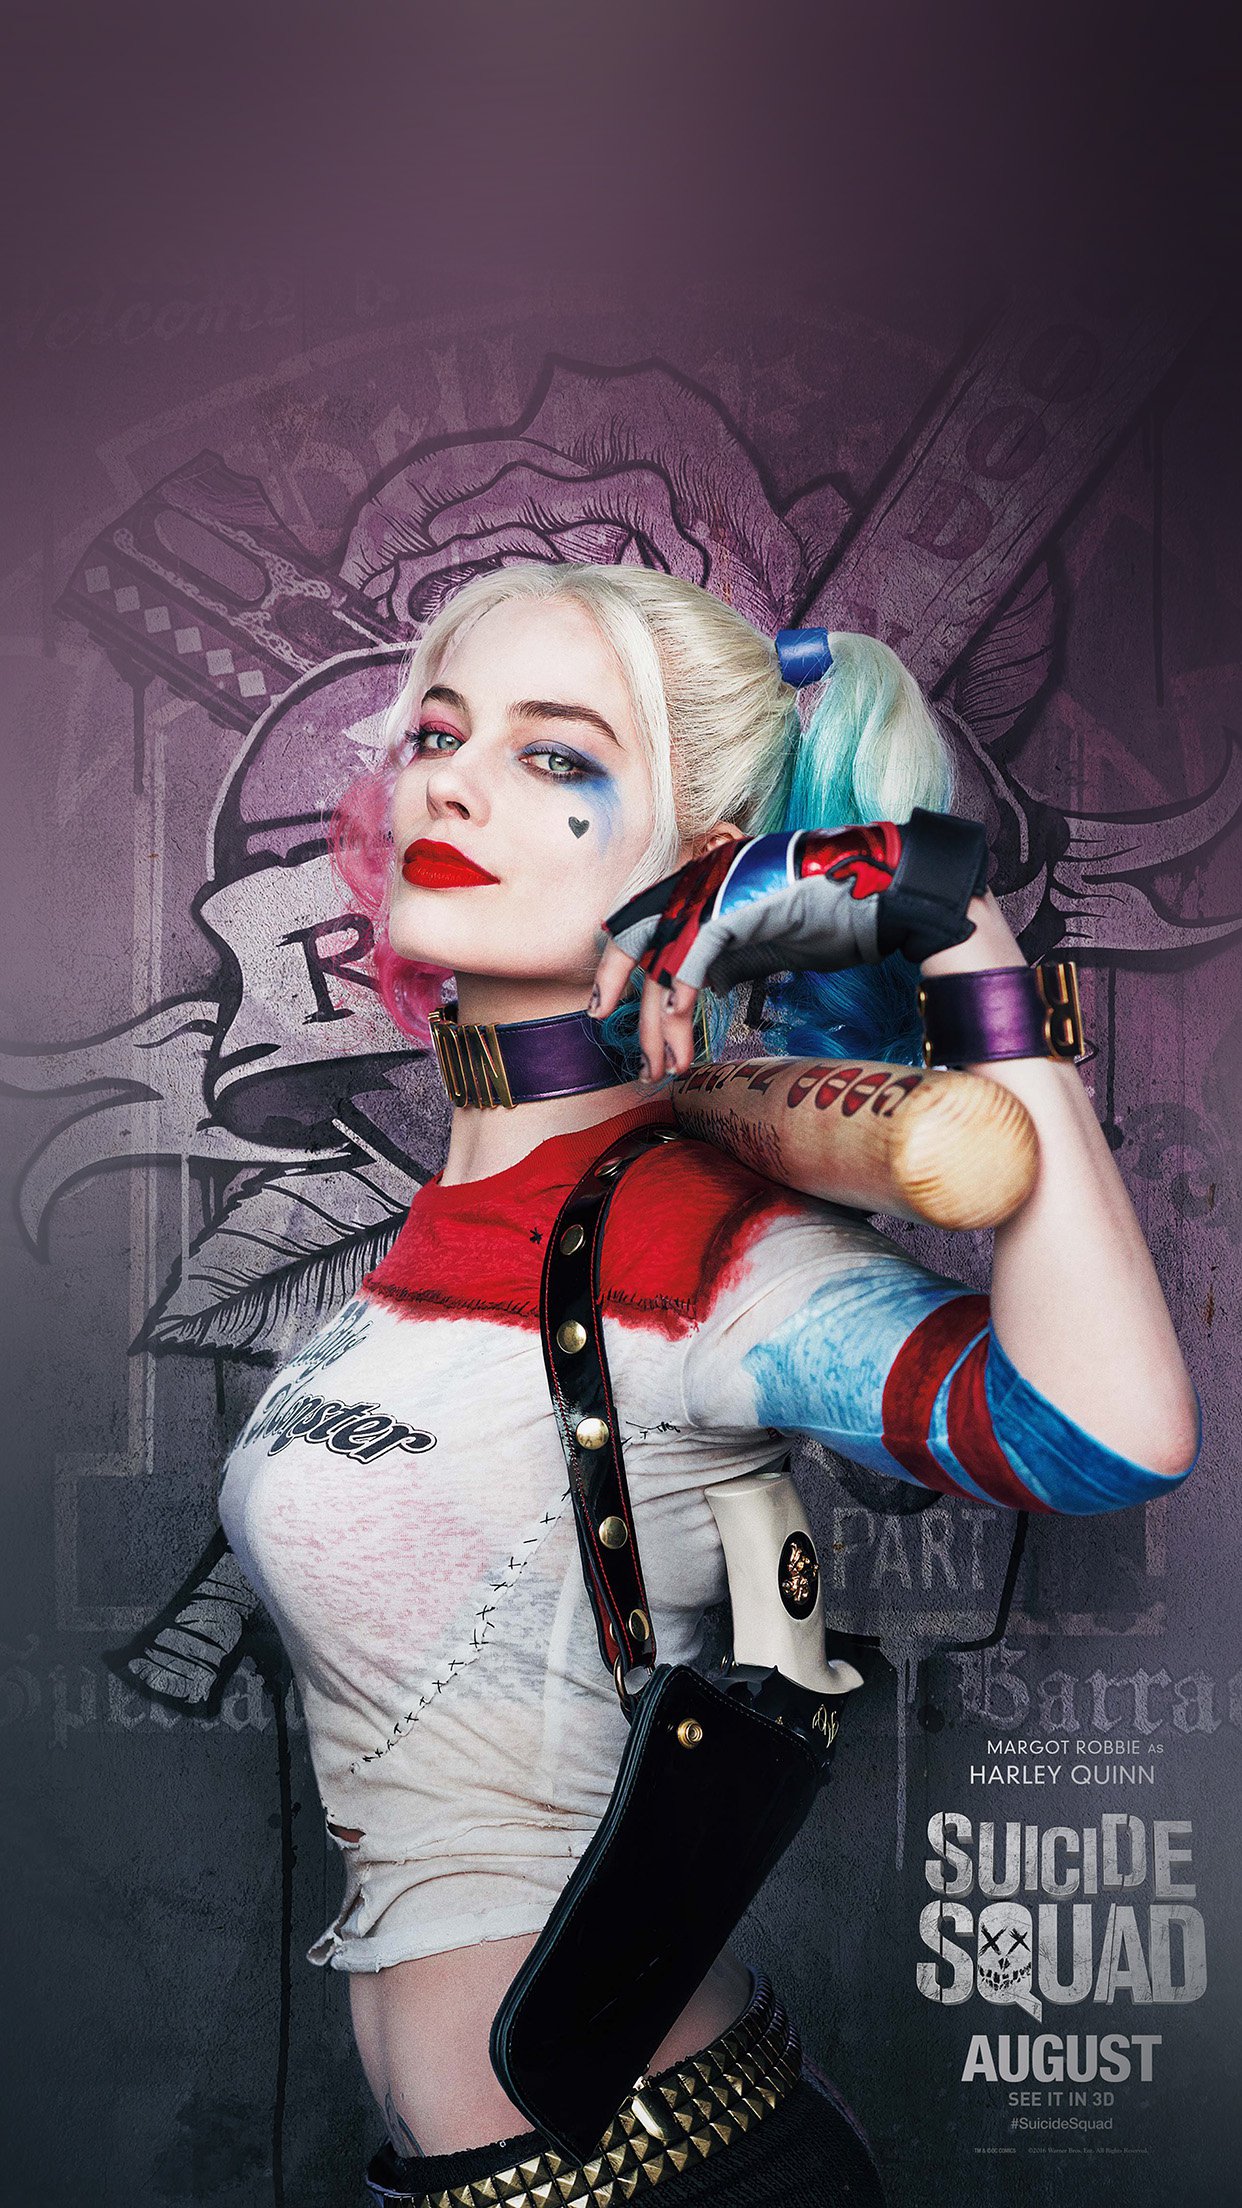 Suicide Squad Poster Film Art Hall Harley Quinn Android wallpaper